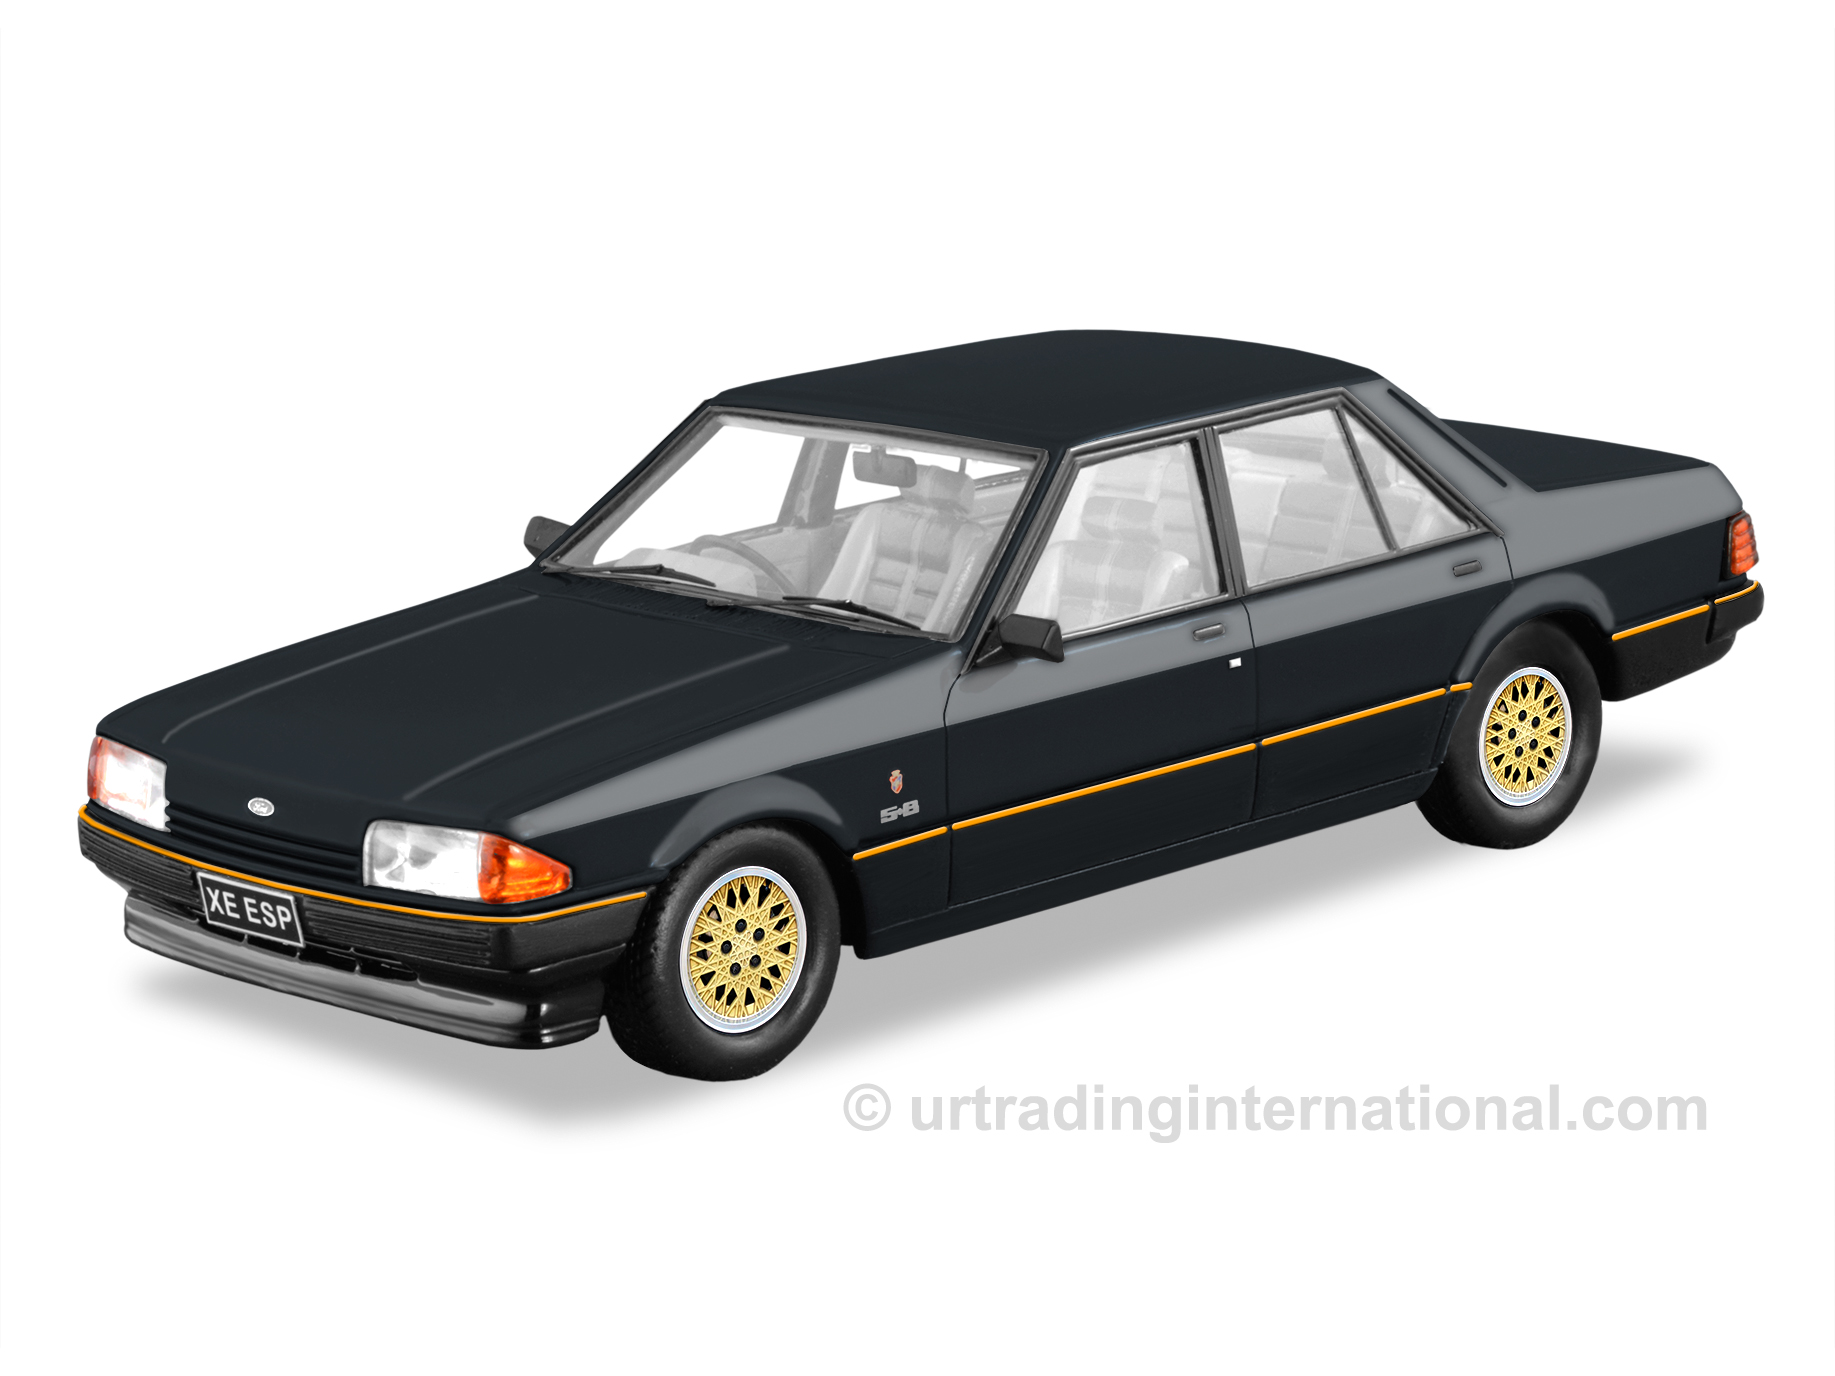 1982 Ford Falcon XE ESP – Charcoal, Limited Edition